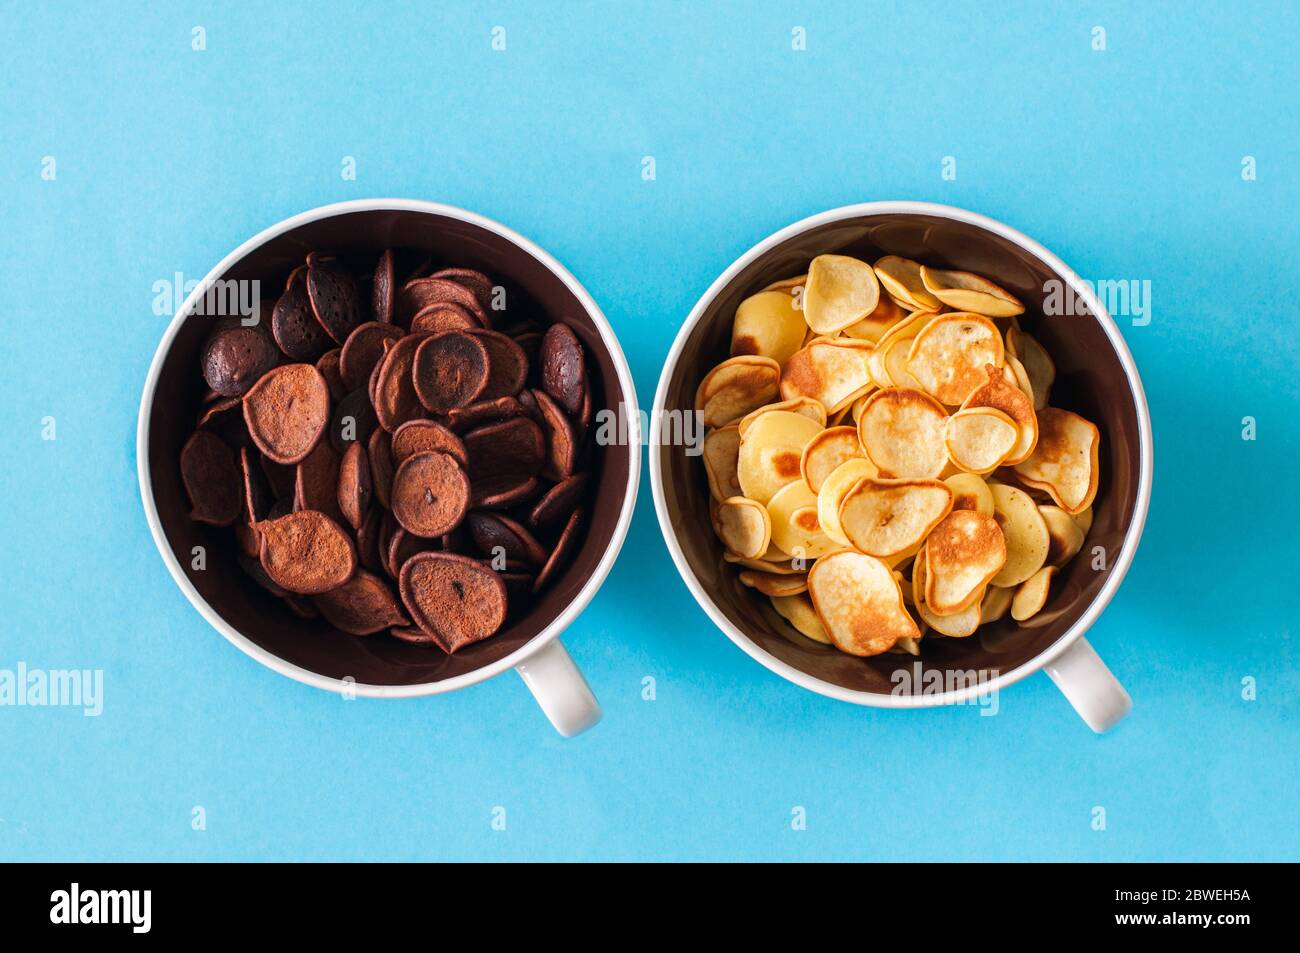 Chocolate and vanilla tiny pancake cereals in a bowls. Top view and flat lay. Blue background. New normal concept. Stock Photo